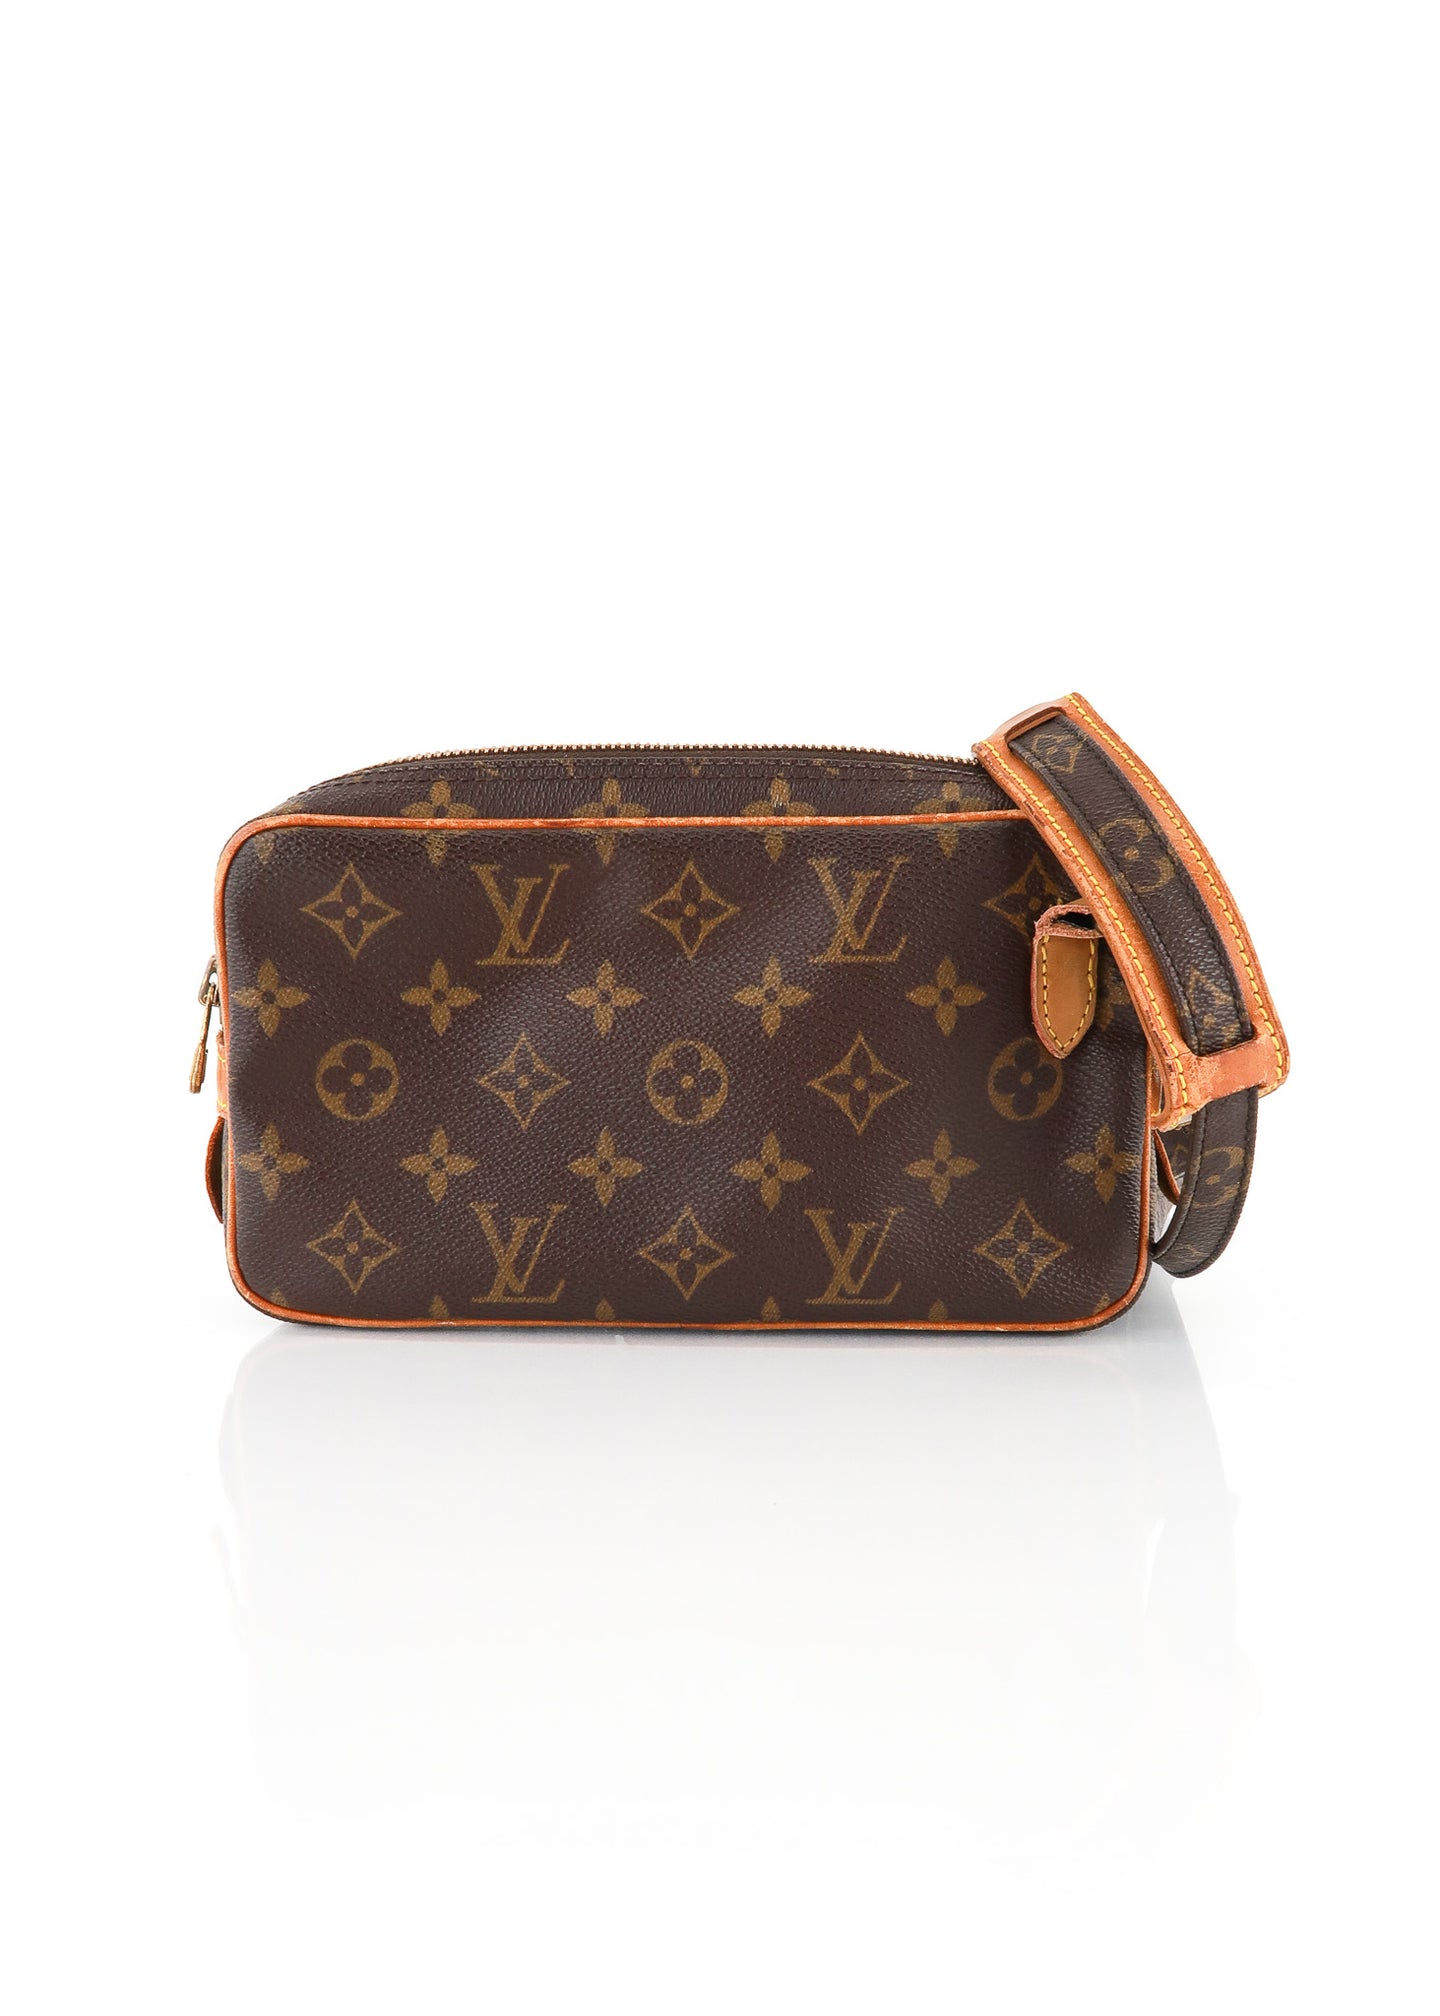 Louis Vuitton Marly Bandouliere Monogram Canvas Crossbody Bag on SALE